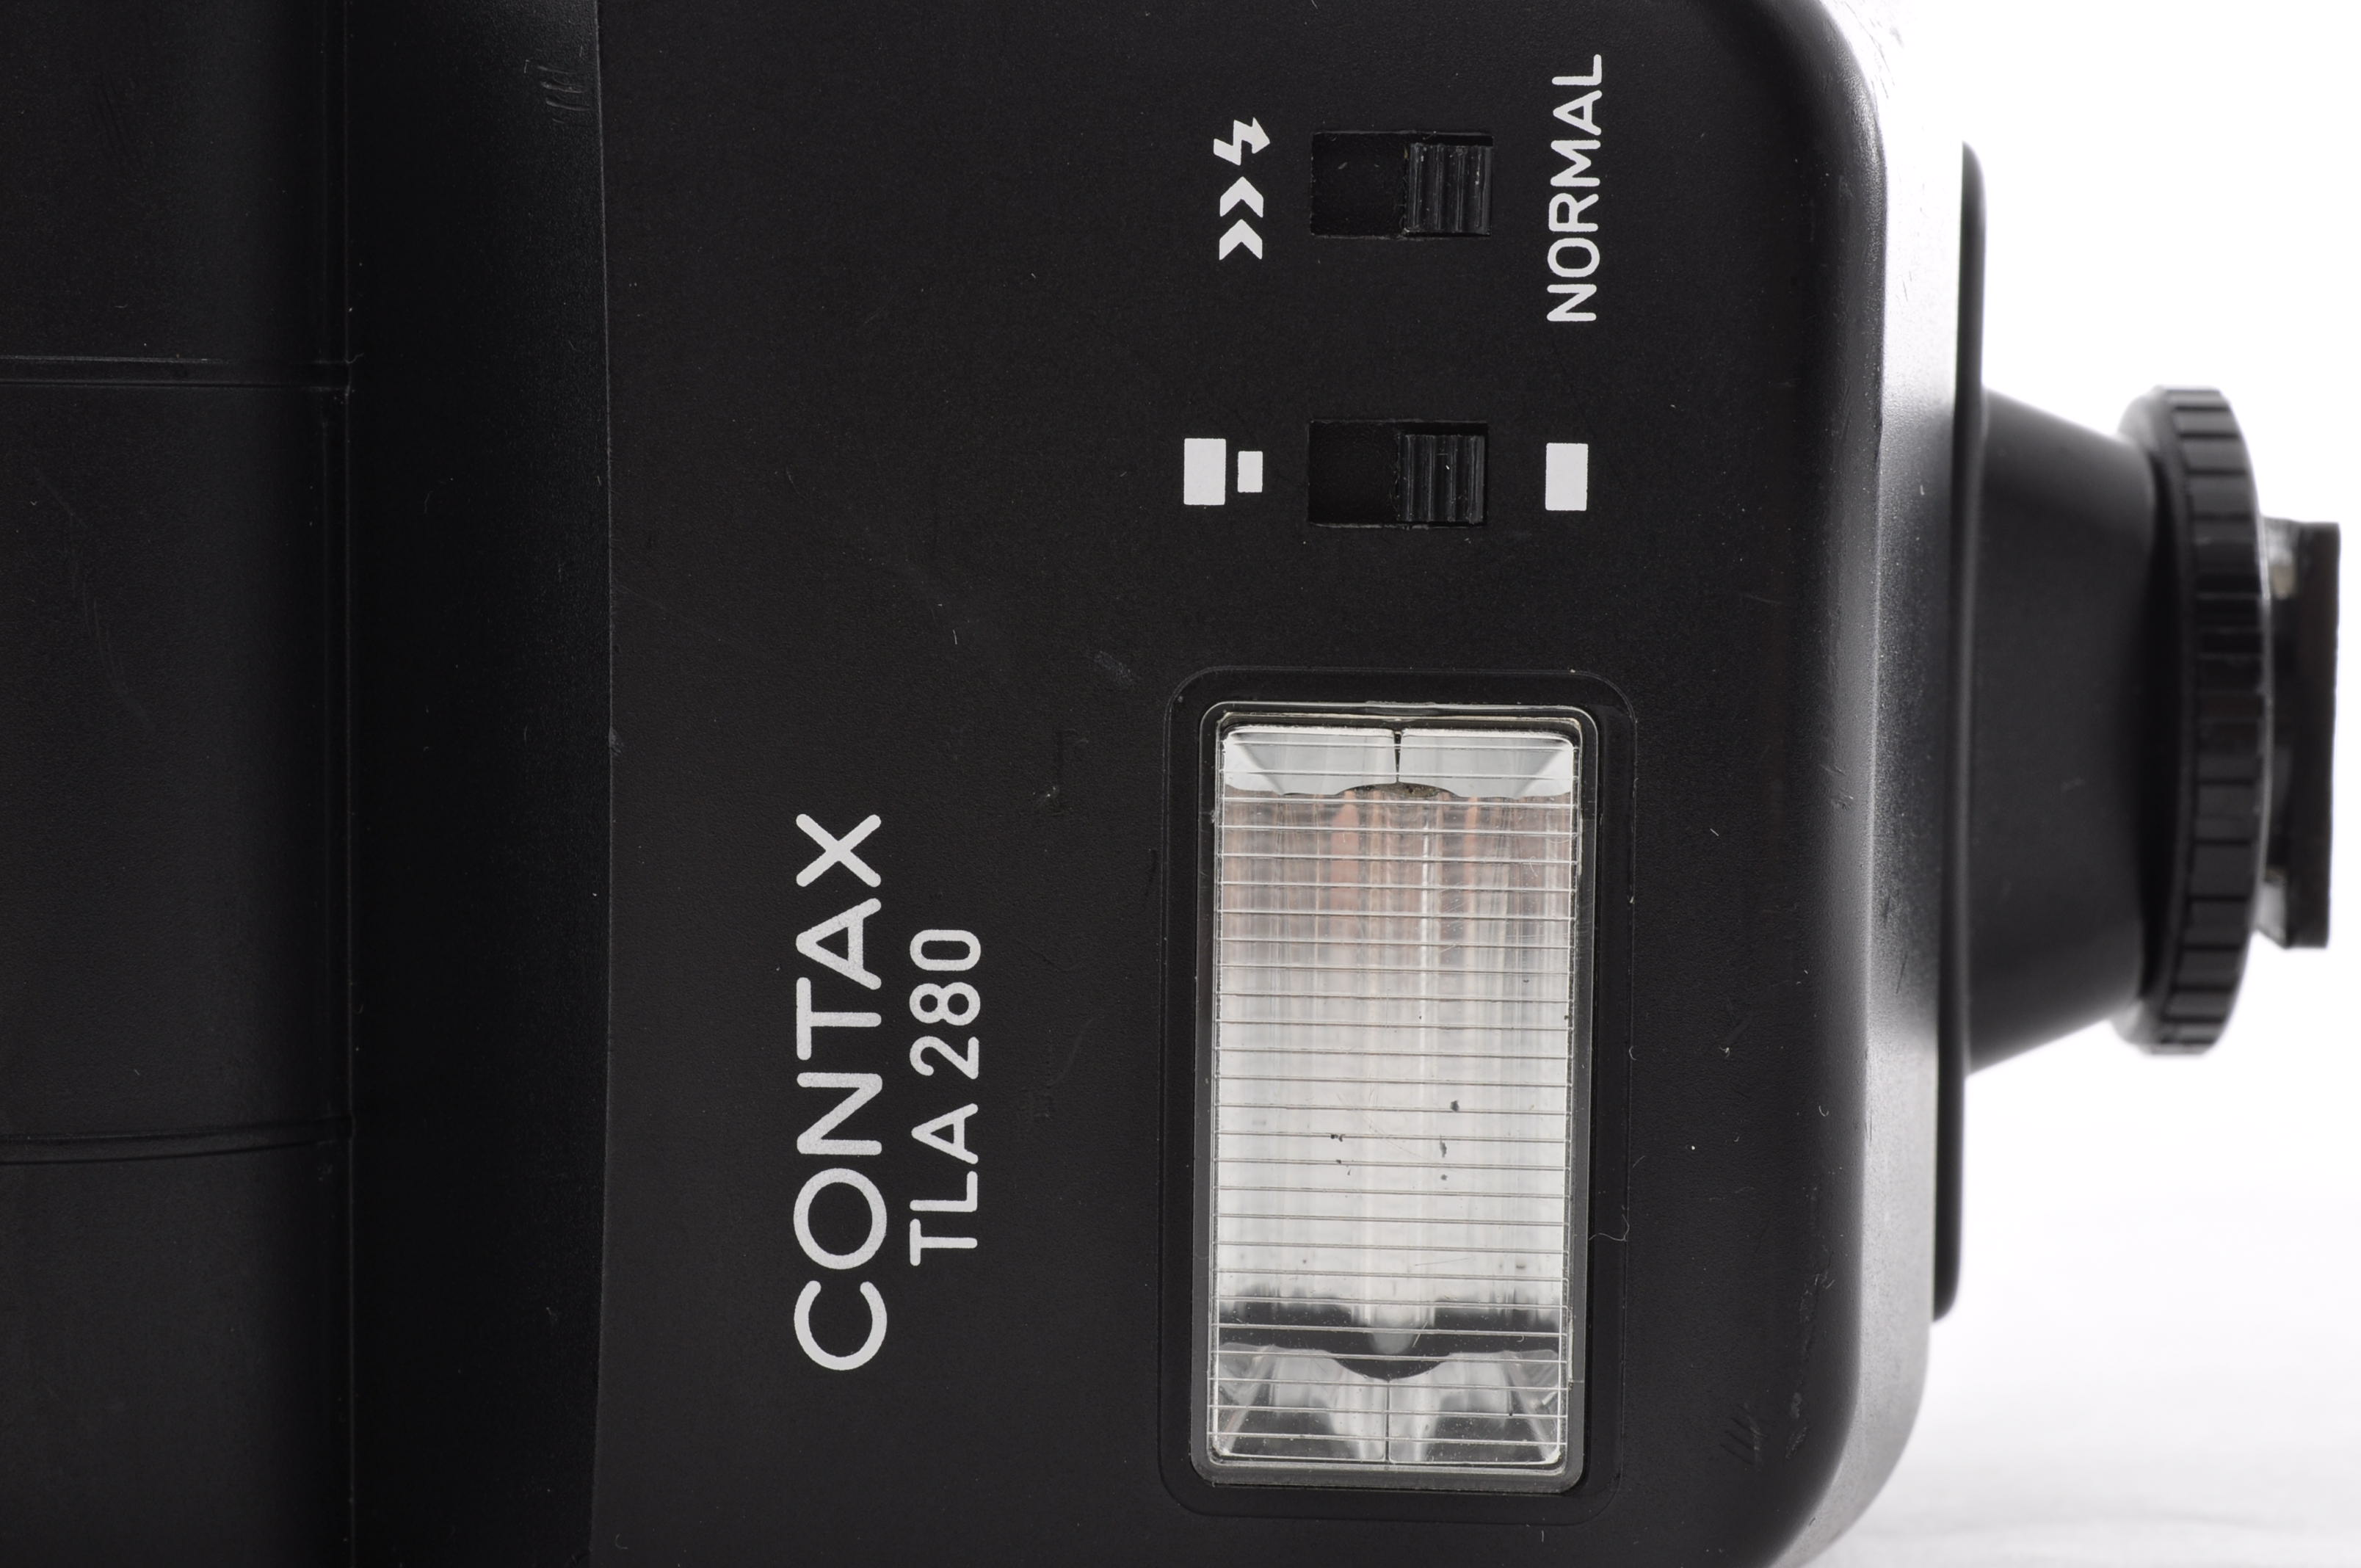 [Excellent] Contax TLA 280 Shoe Mount Flash For Contax SLR From Japan img12